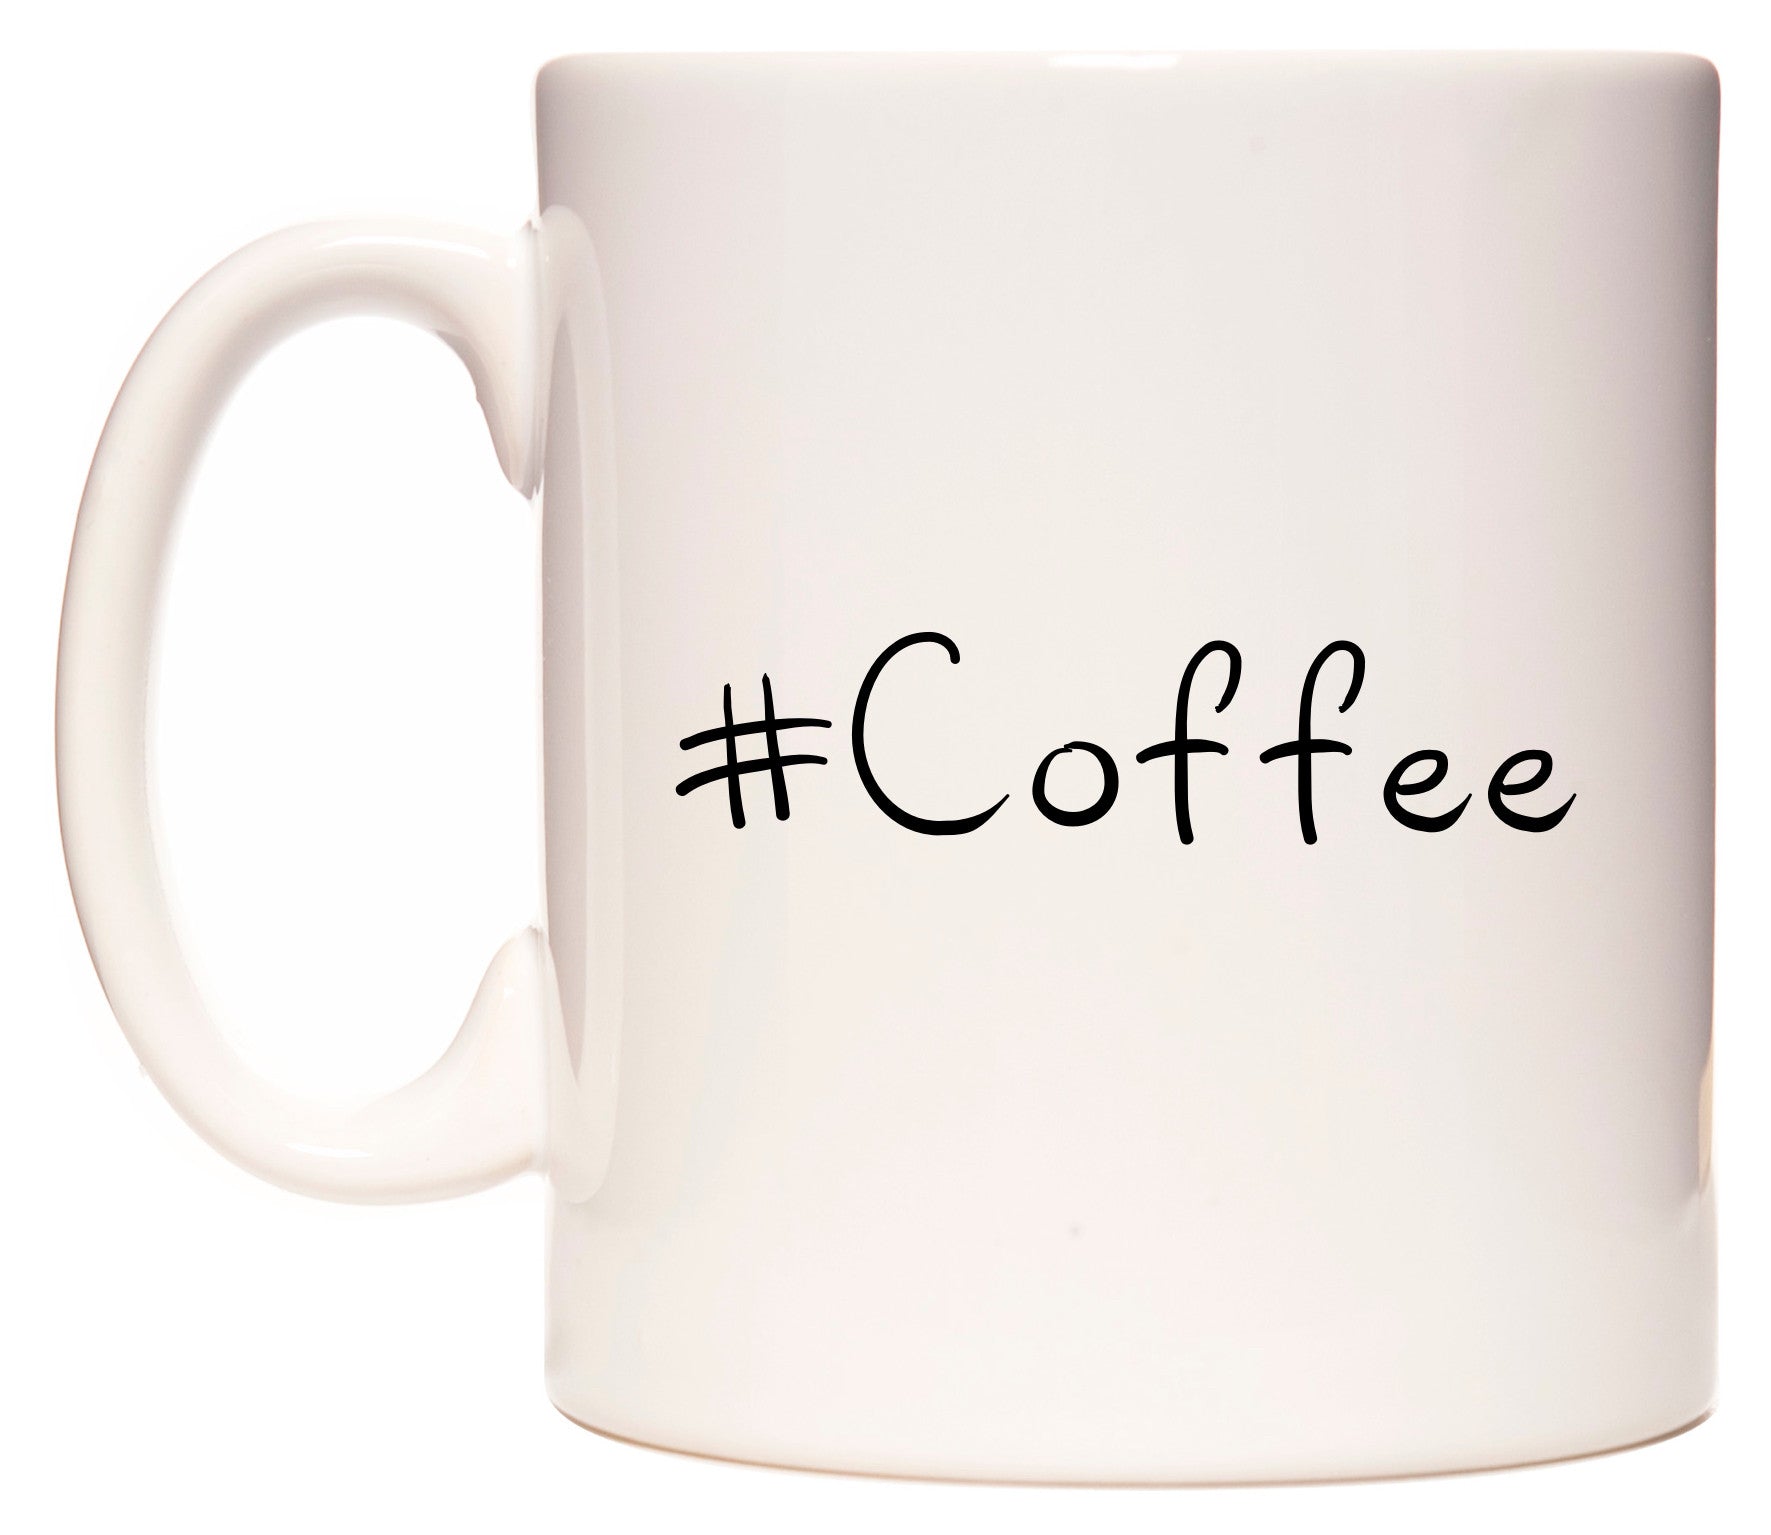 This mug features #Coffee